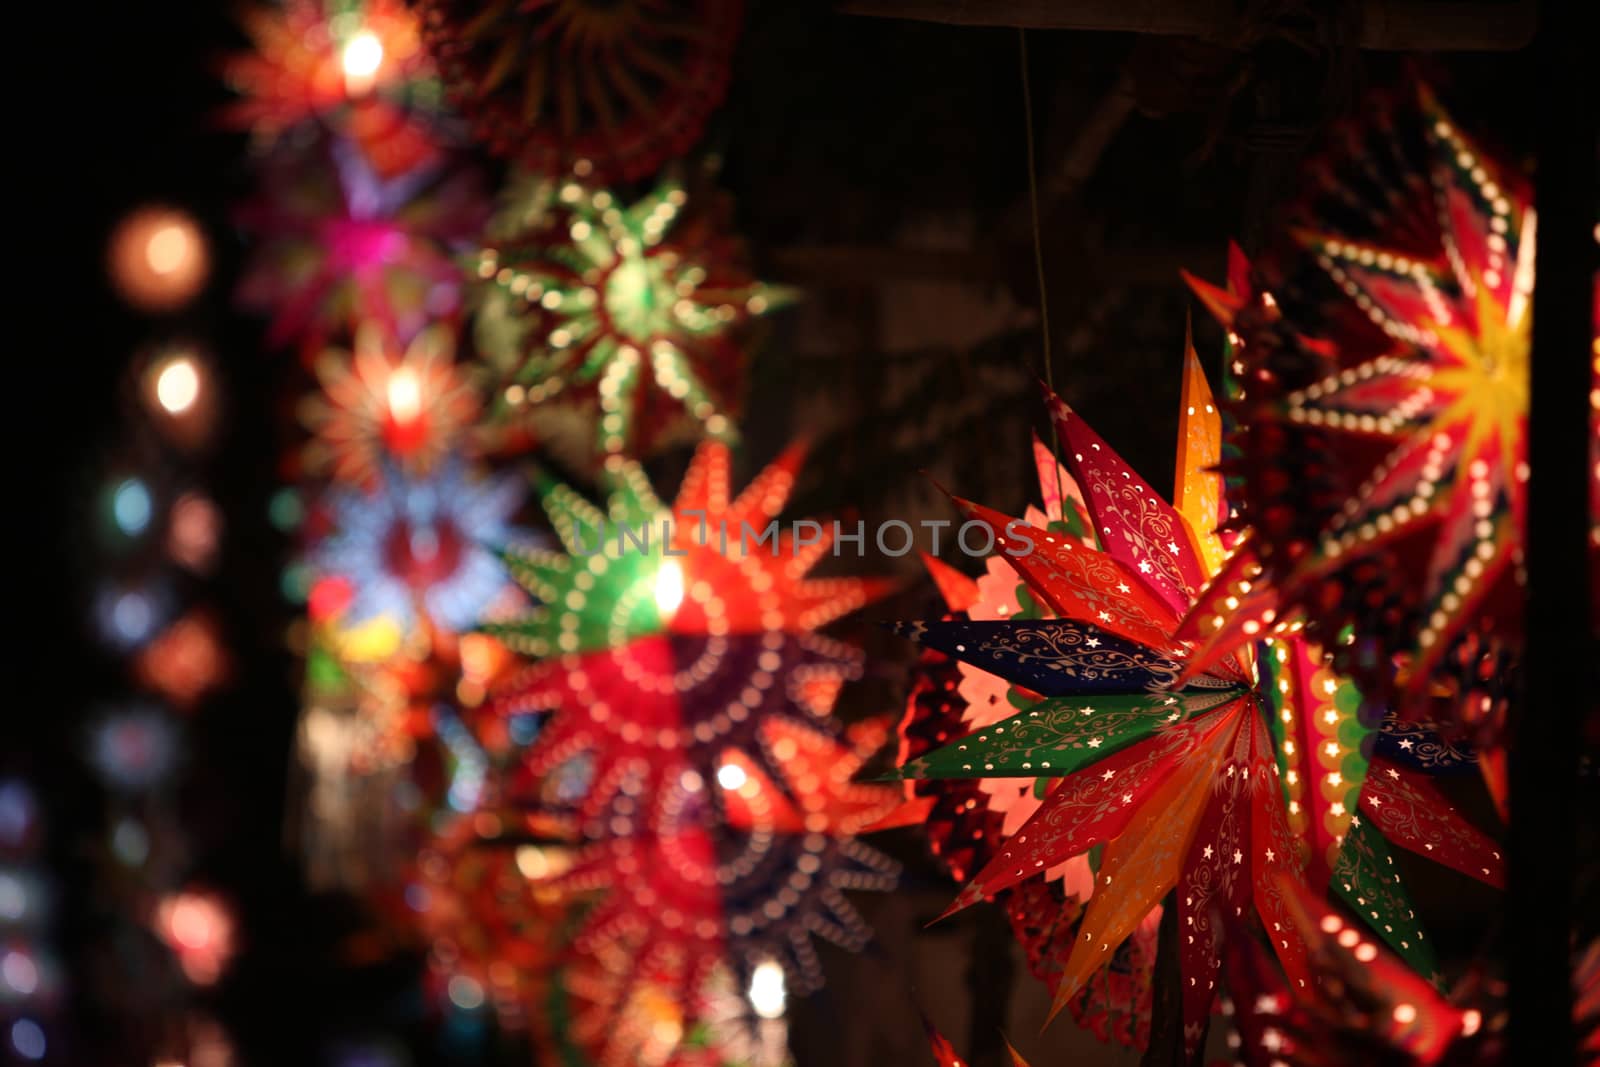 Beautiful colorful traditional lanterns lit up on occasion of Diwali / Christmas festival in India